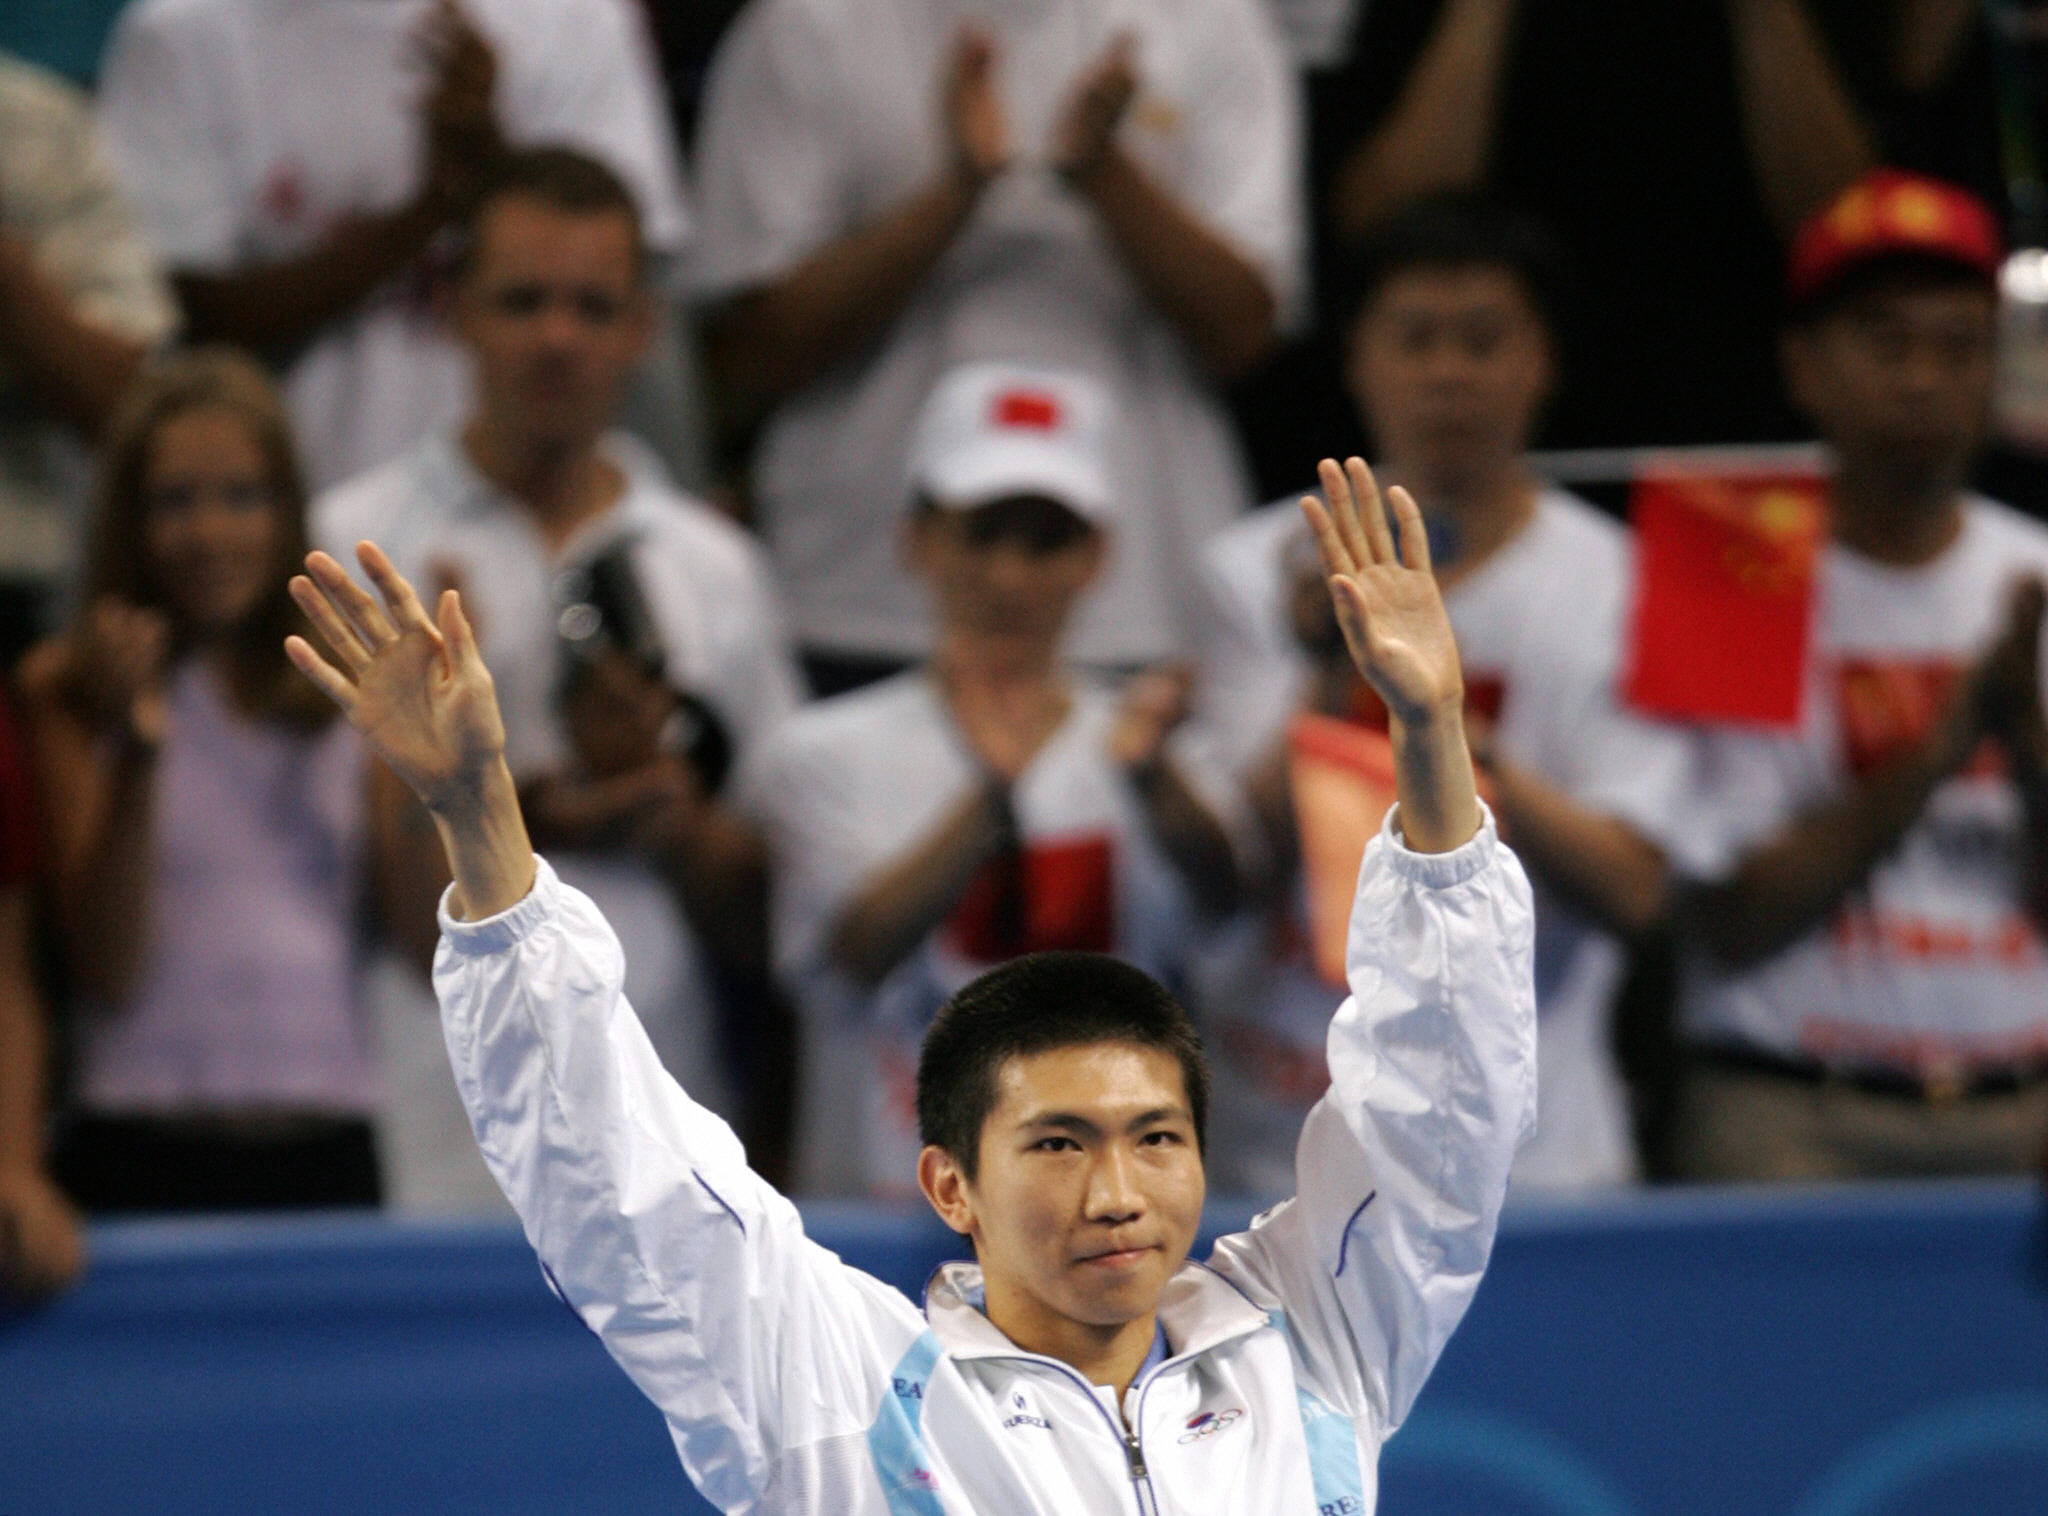 Ryu Seung-min was the men's singles table tennis gold medallist at the 2004 Olympic Games in Athens ©Getty Images